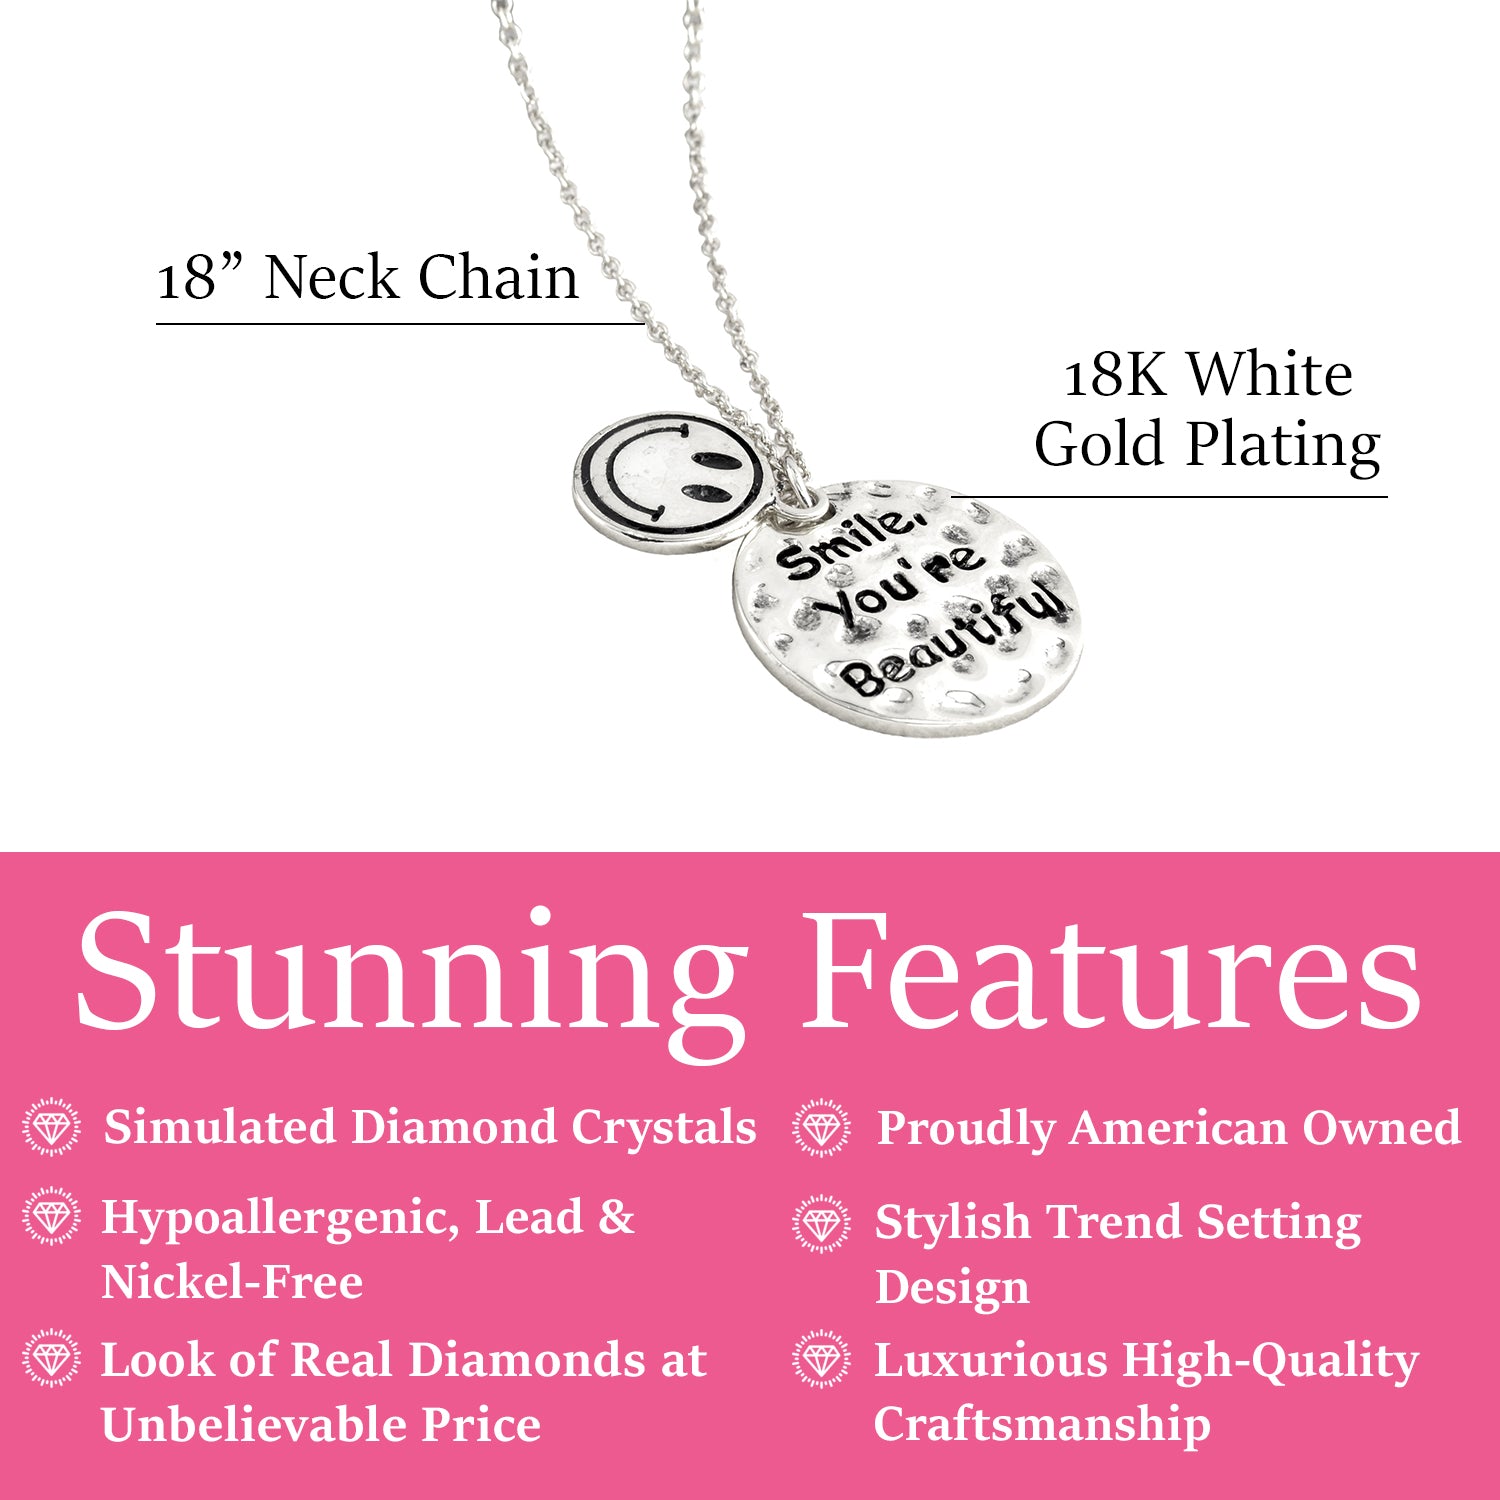 Smile 18k White Gold Plated Silver Pendant Necklace